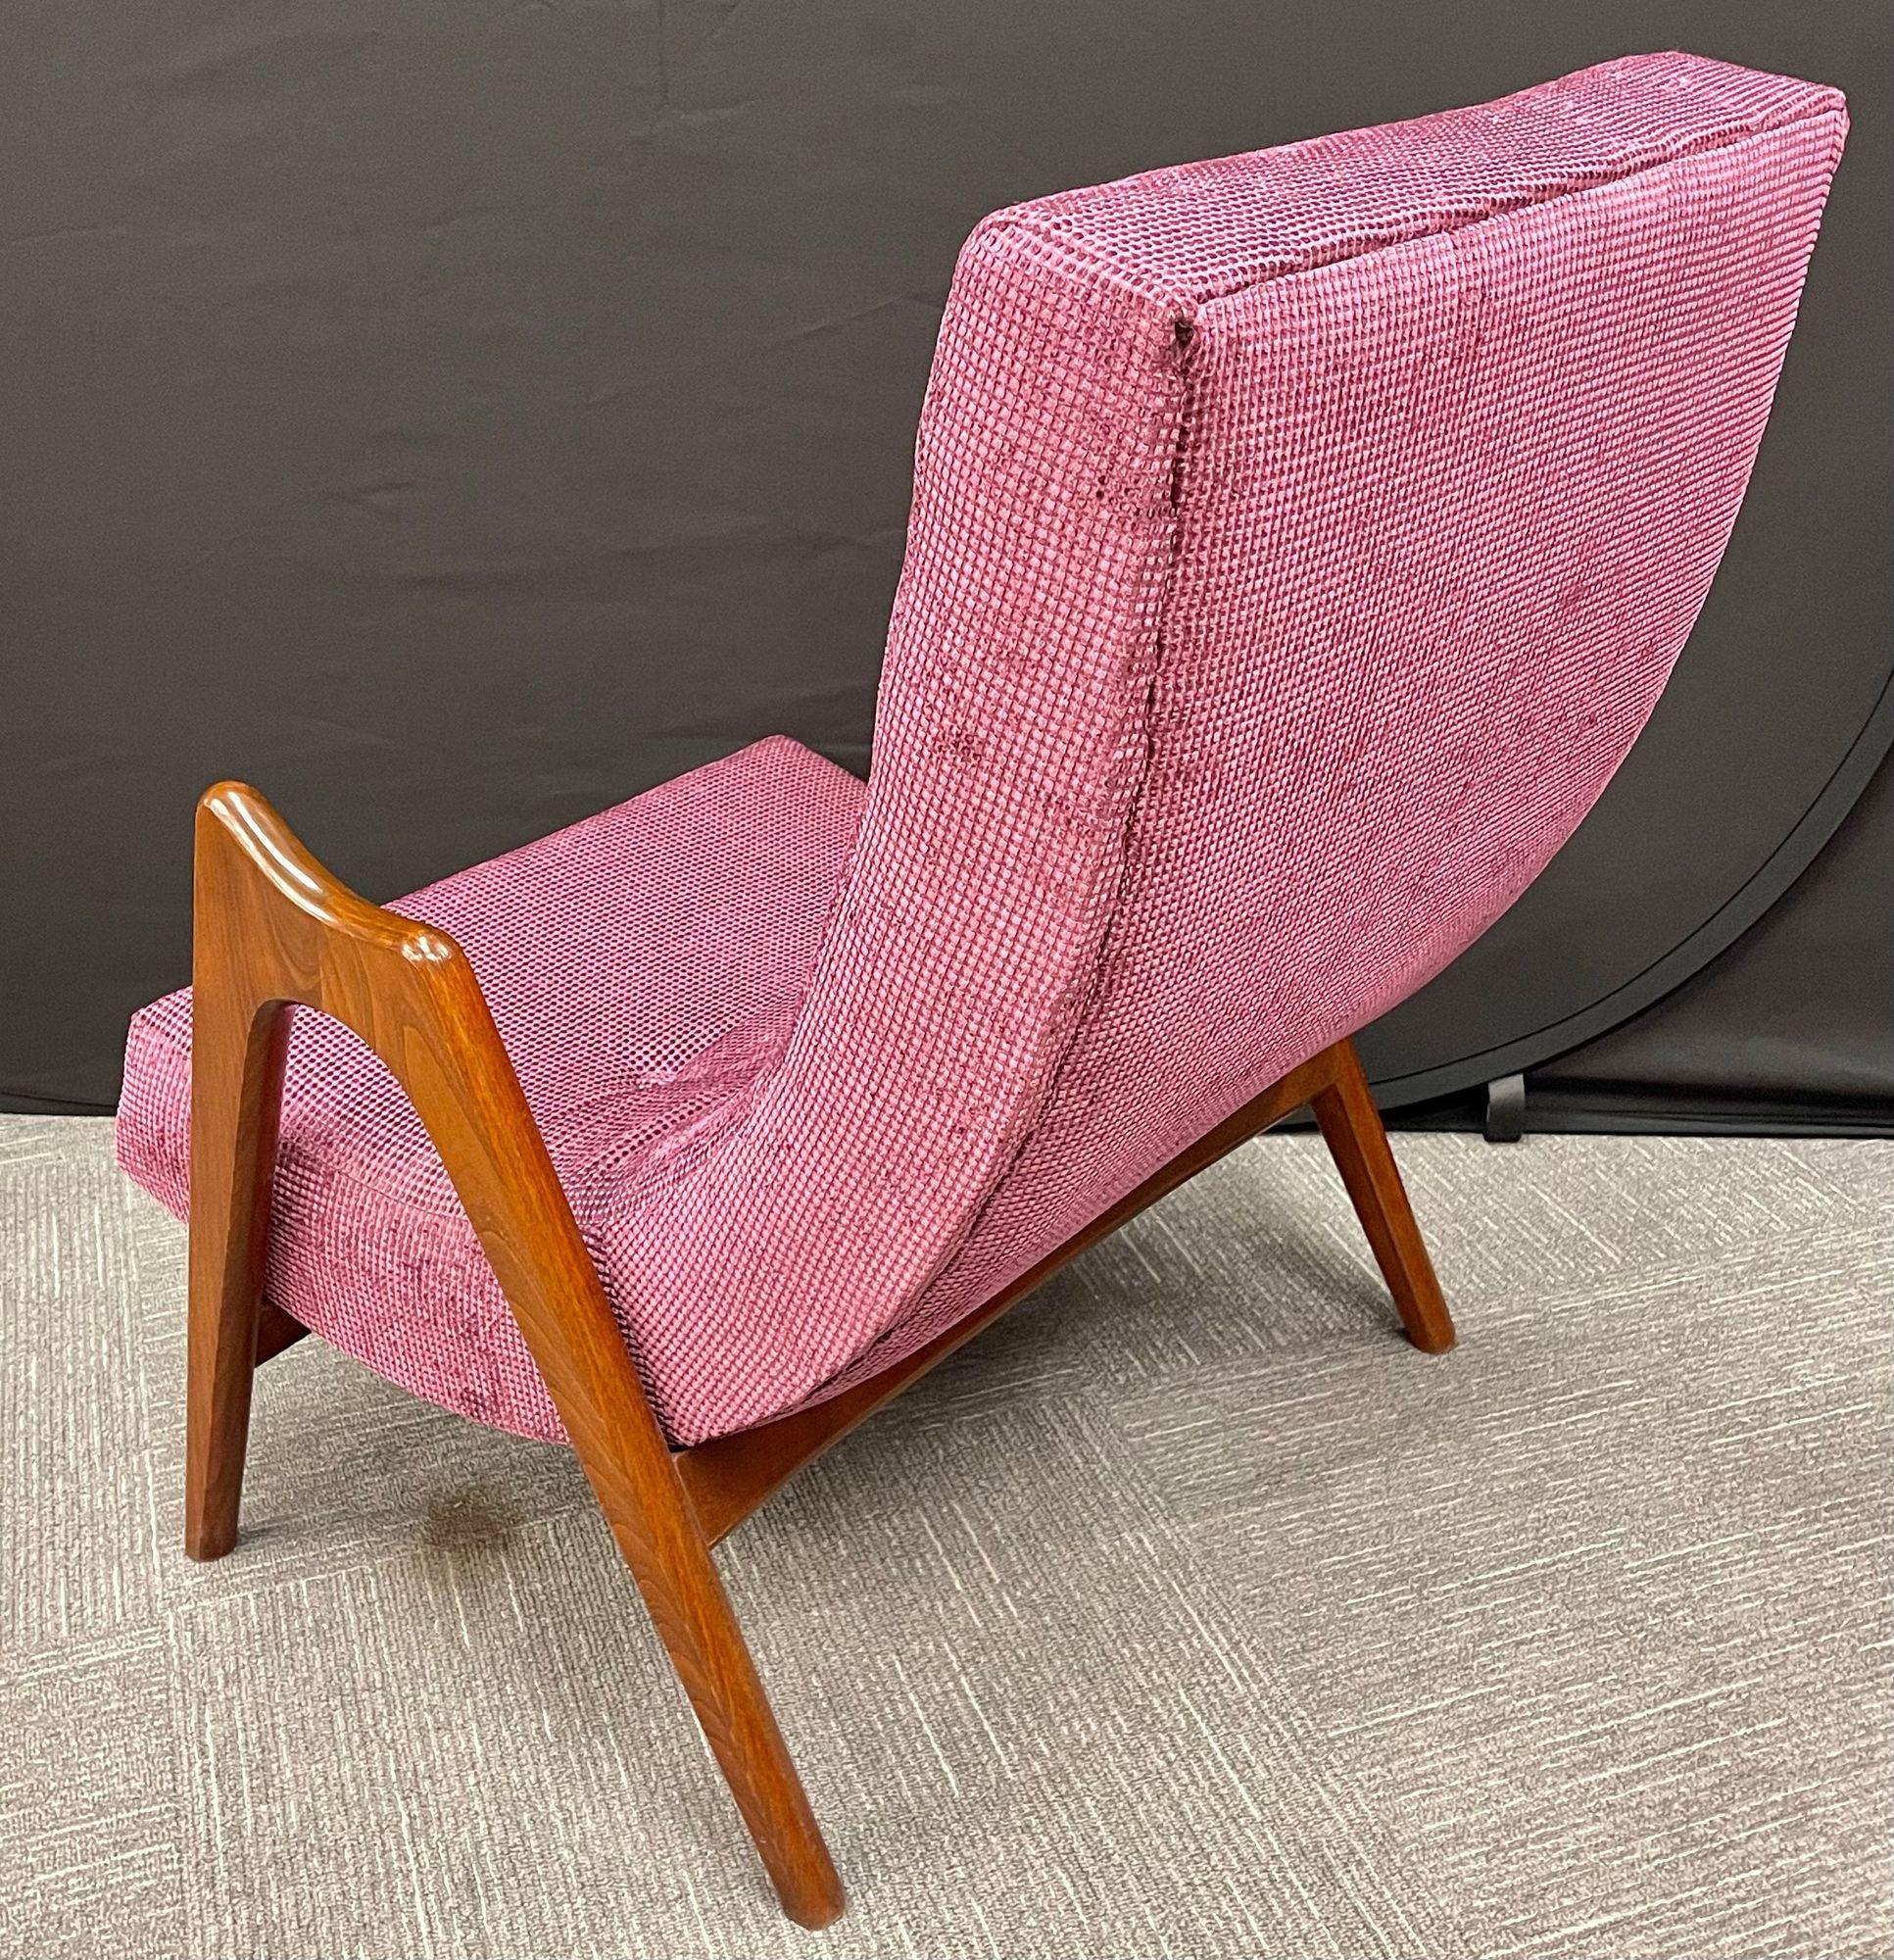 Single Sculptural Italian Mid-Century Modern Lounge Chair in Walnut, Mahogany In Good Condition For Sale In Stamford, CT